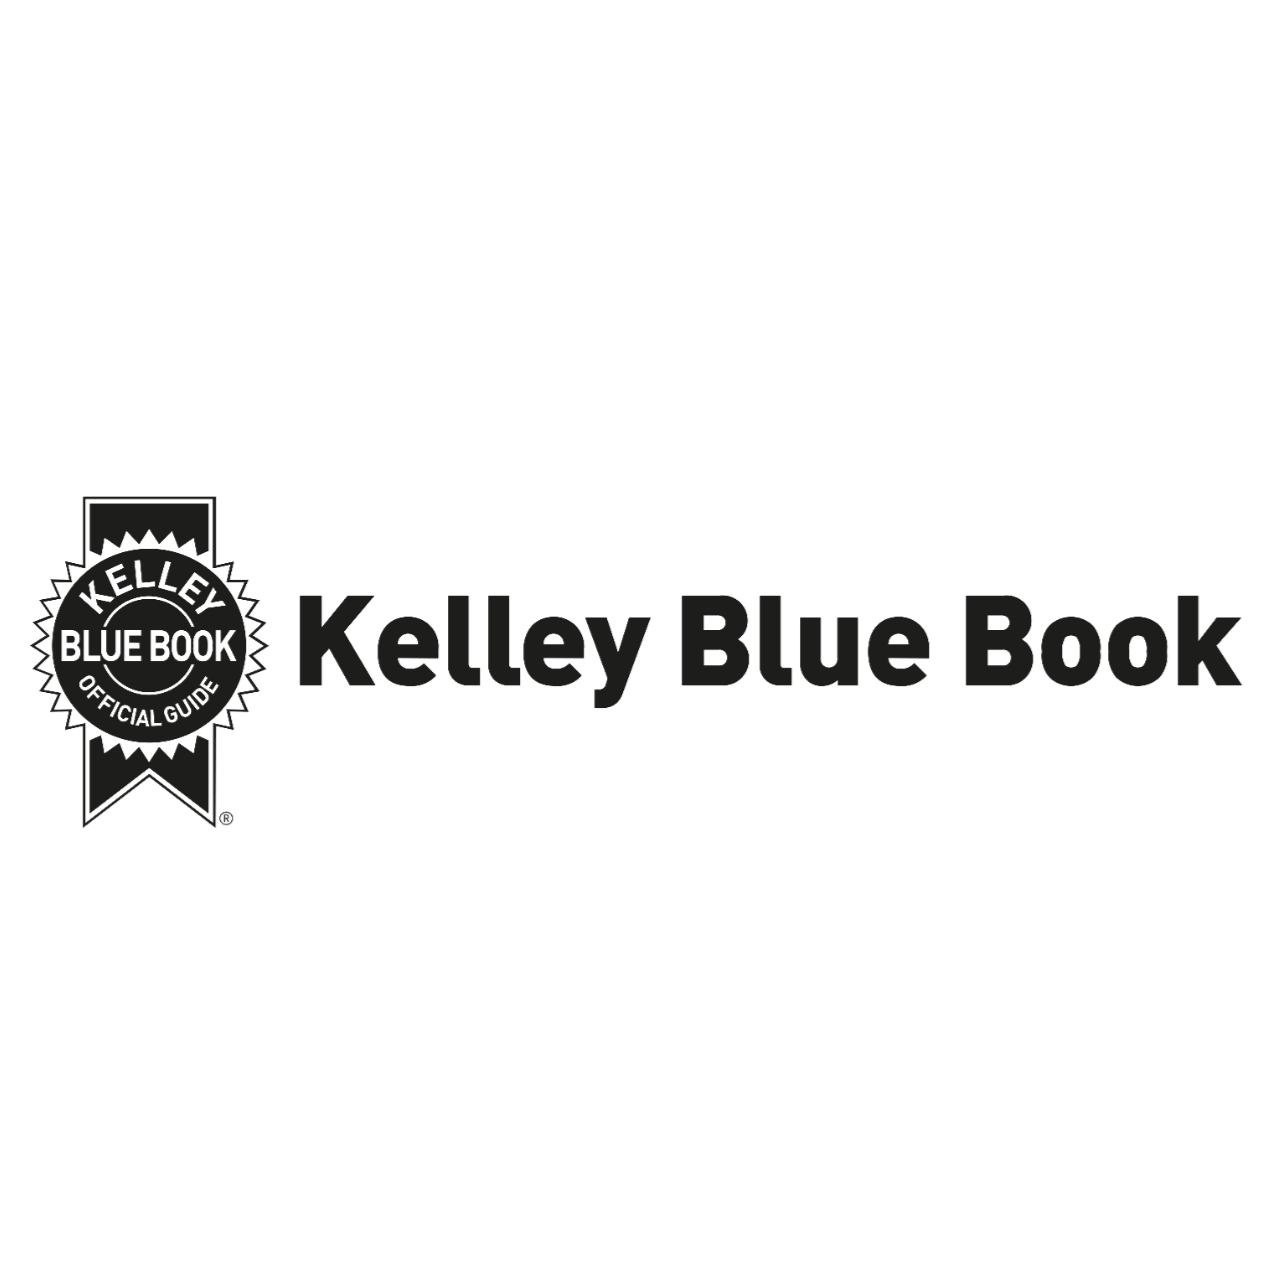 Kelly-Blue-Book.png